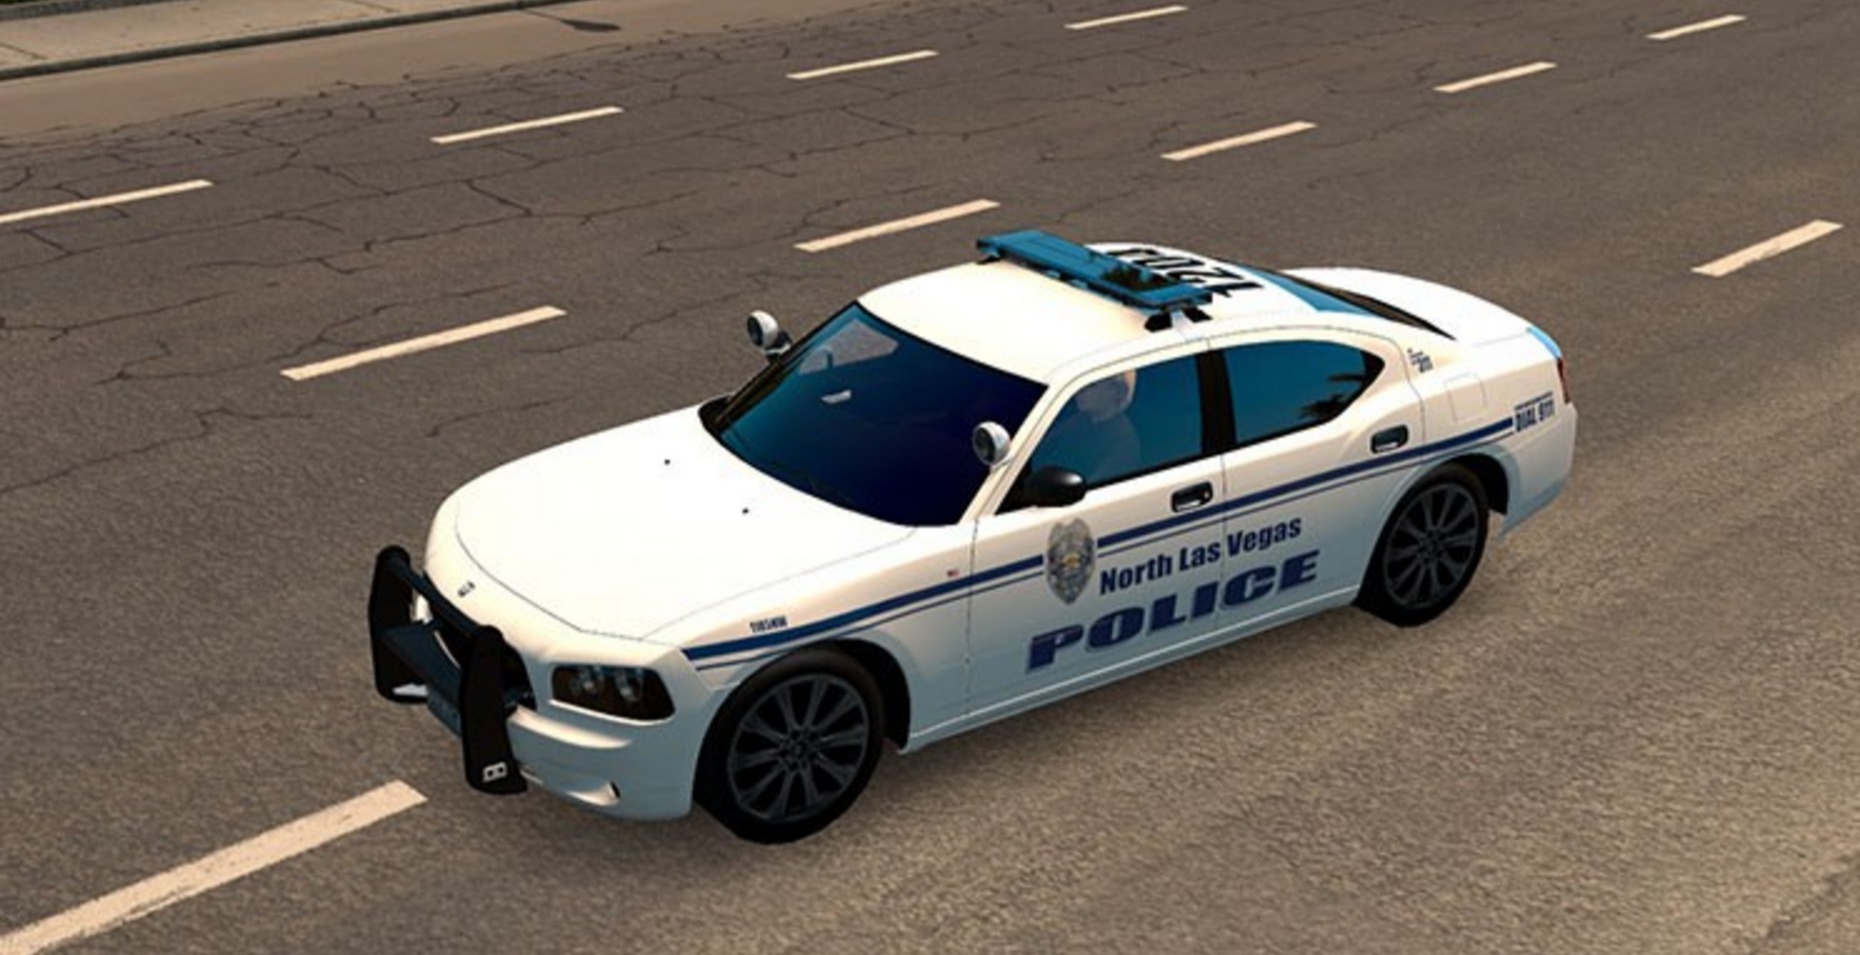 ai-police-dodge-charger-for-ats-1.jpeg